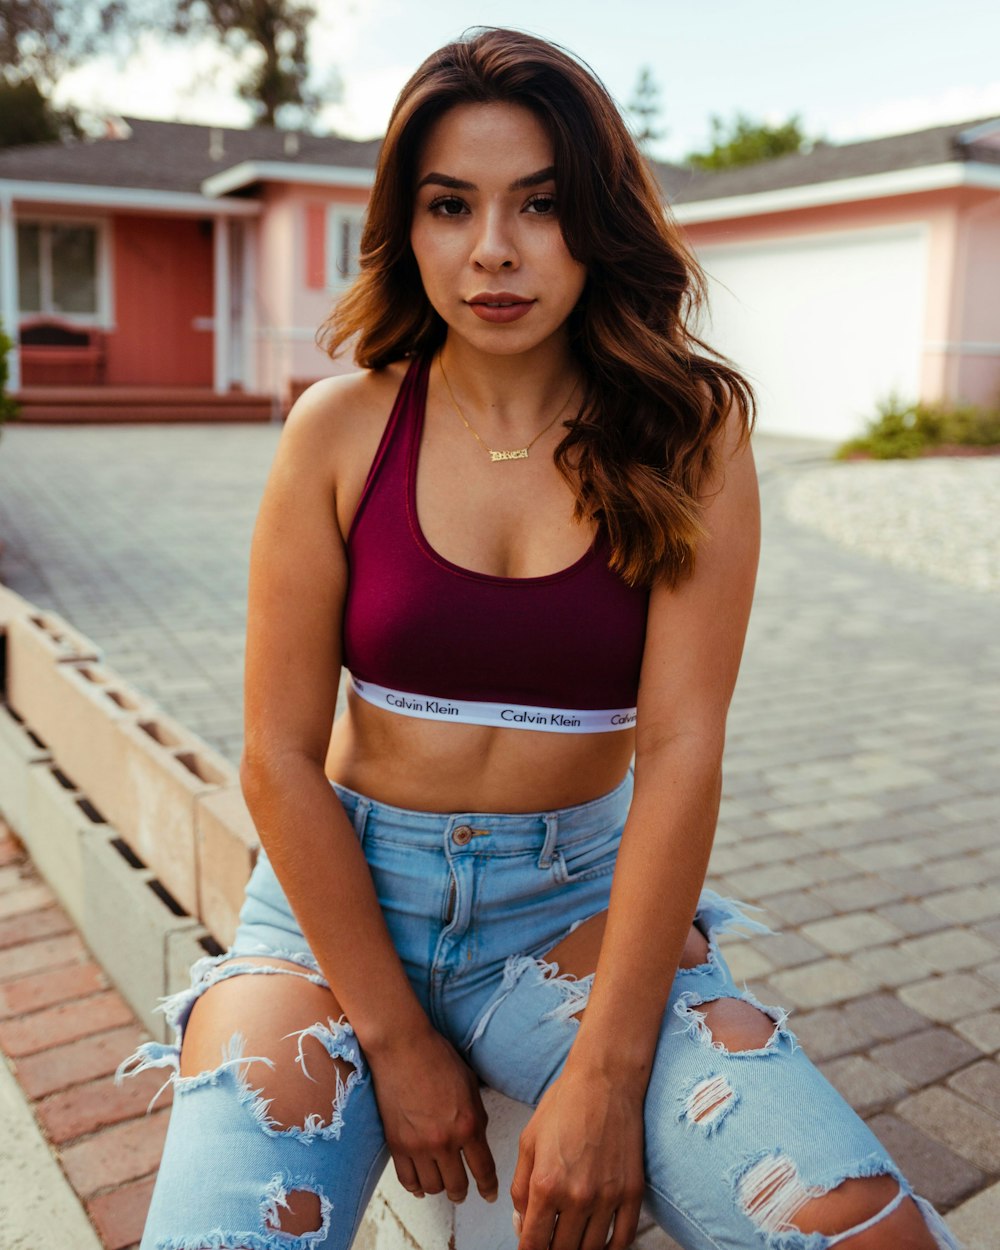 Woman in purple sports bra and blue denim shorts sitting on concrete stairs  during daytime photo – Free Apparel Image on Unsplash